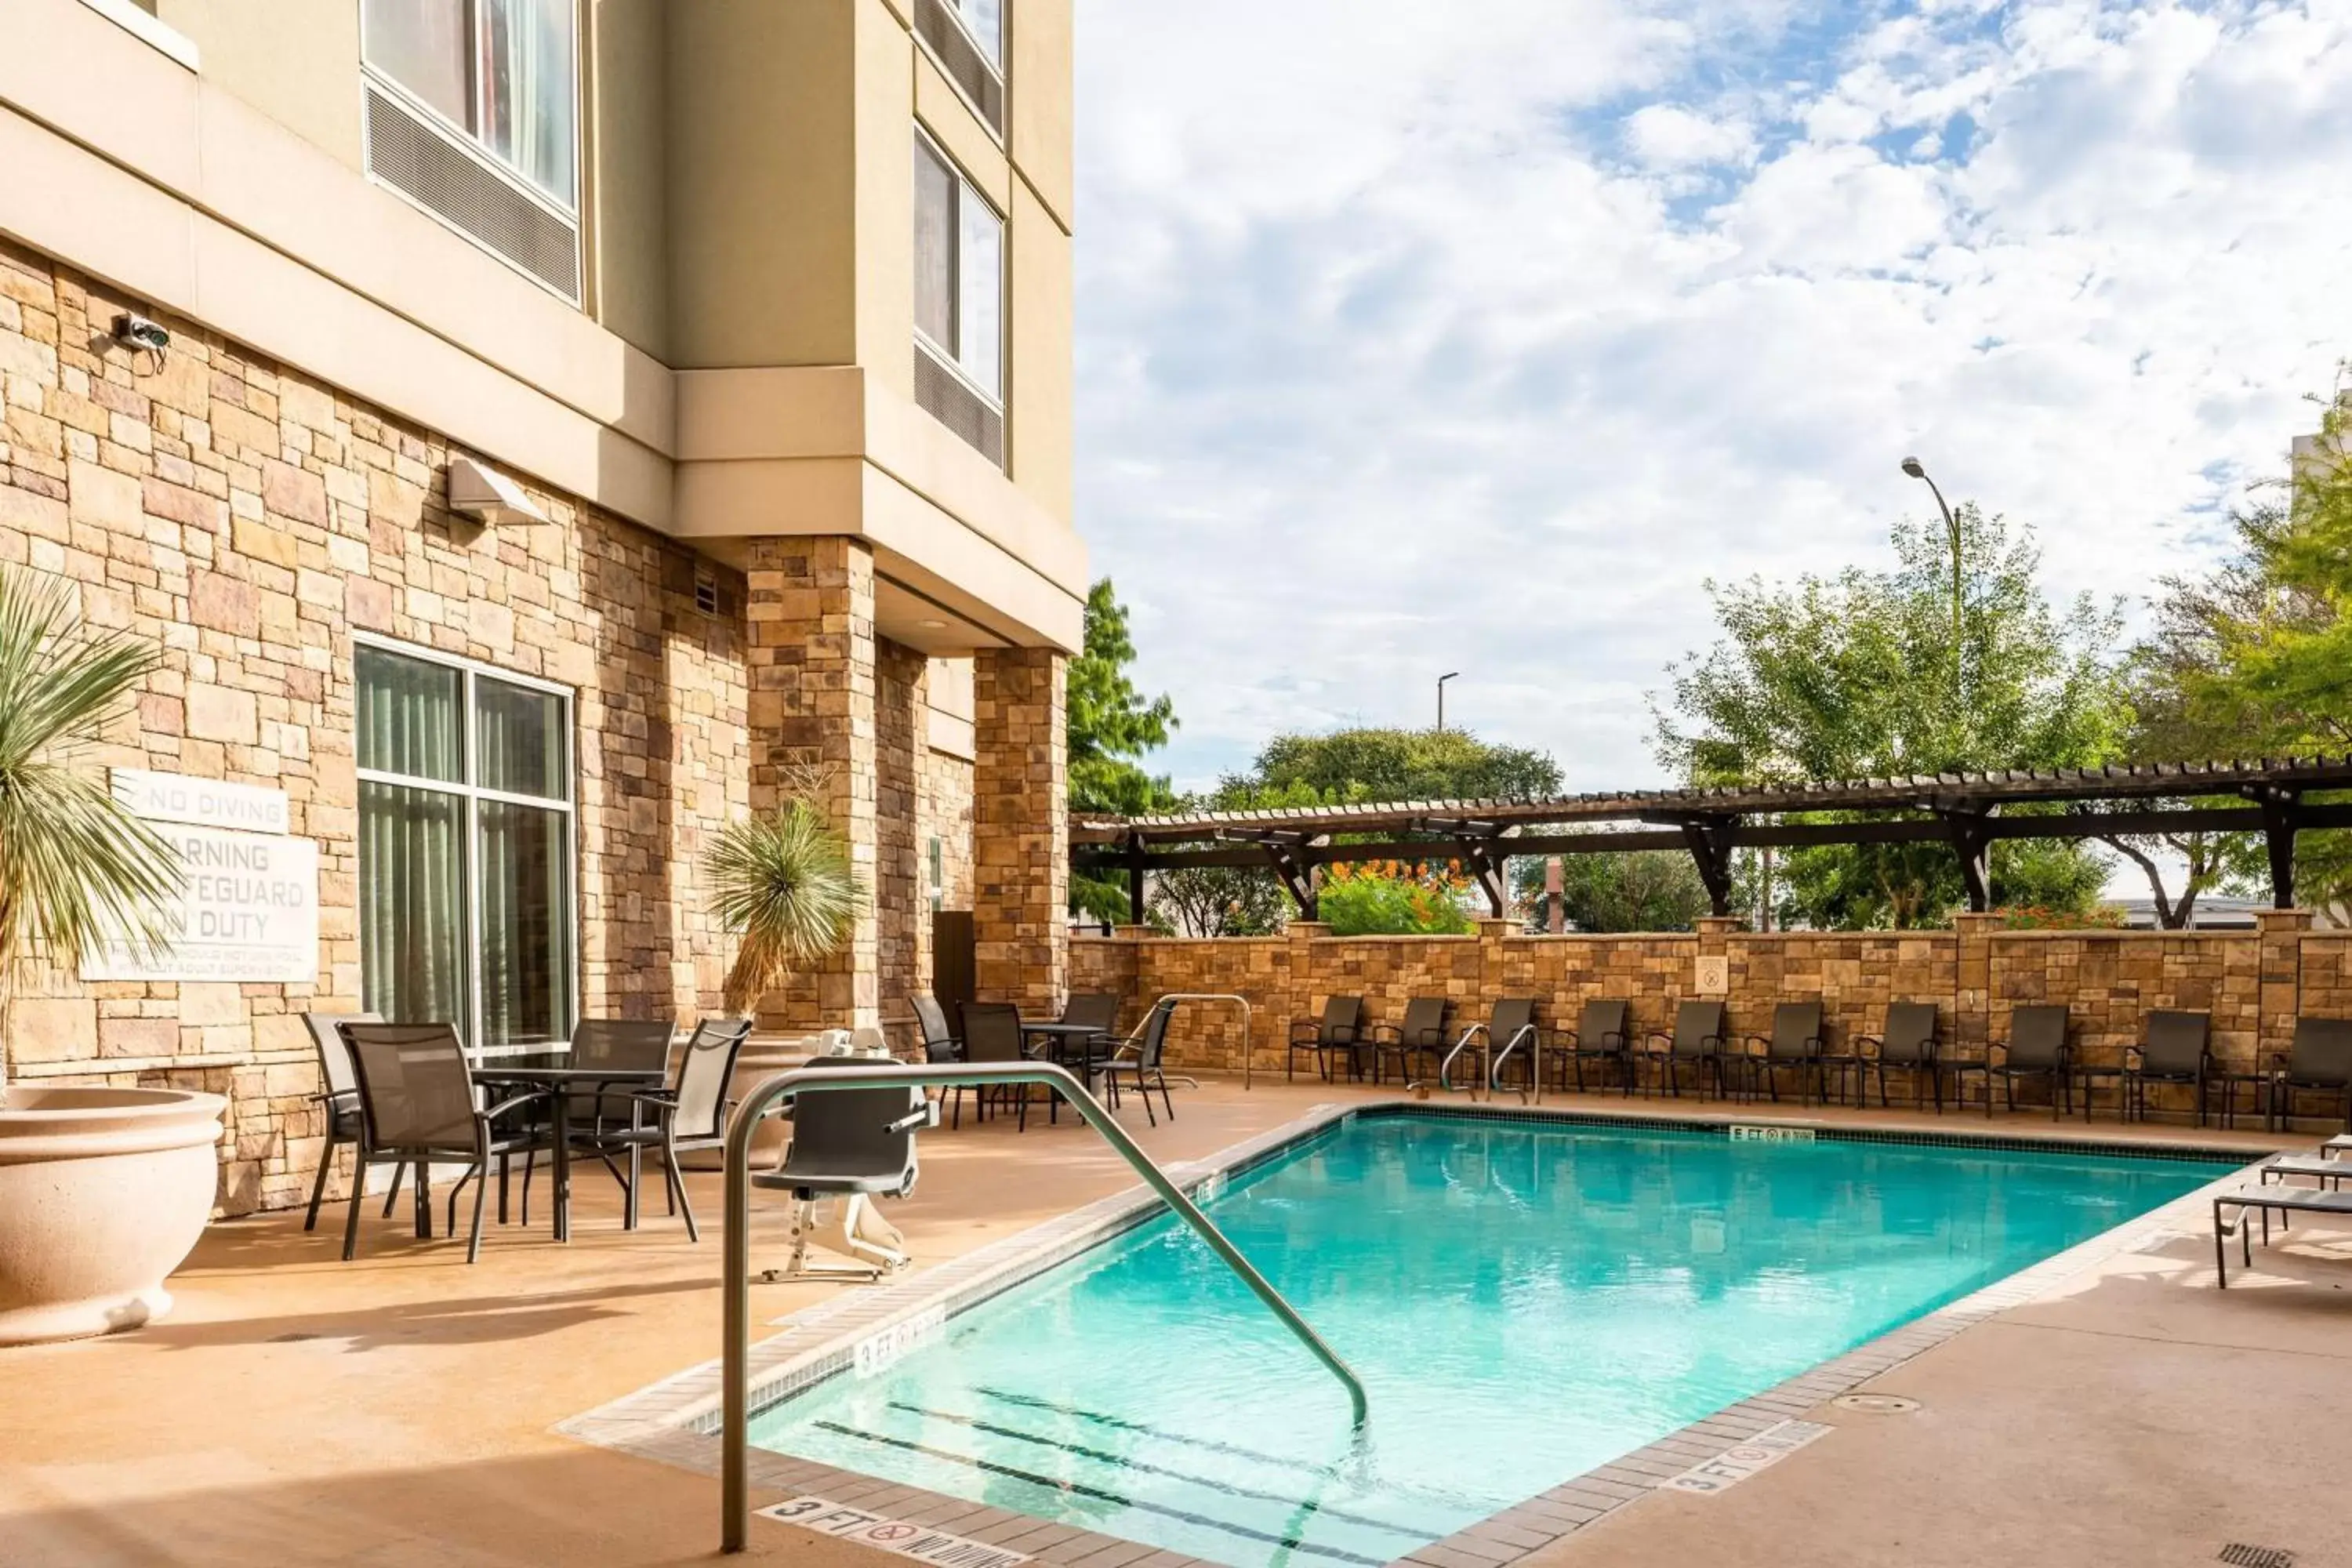 Swimming Pool in Springhill Suites by Marriott San Antonio Alamo Plaza/Convention Center